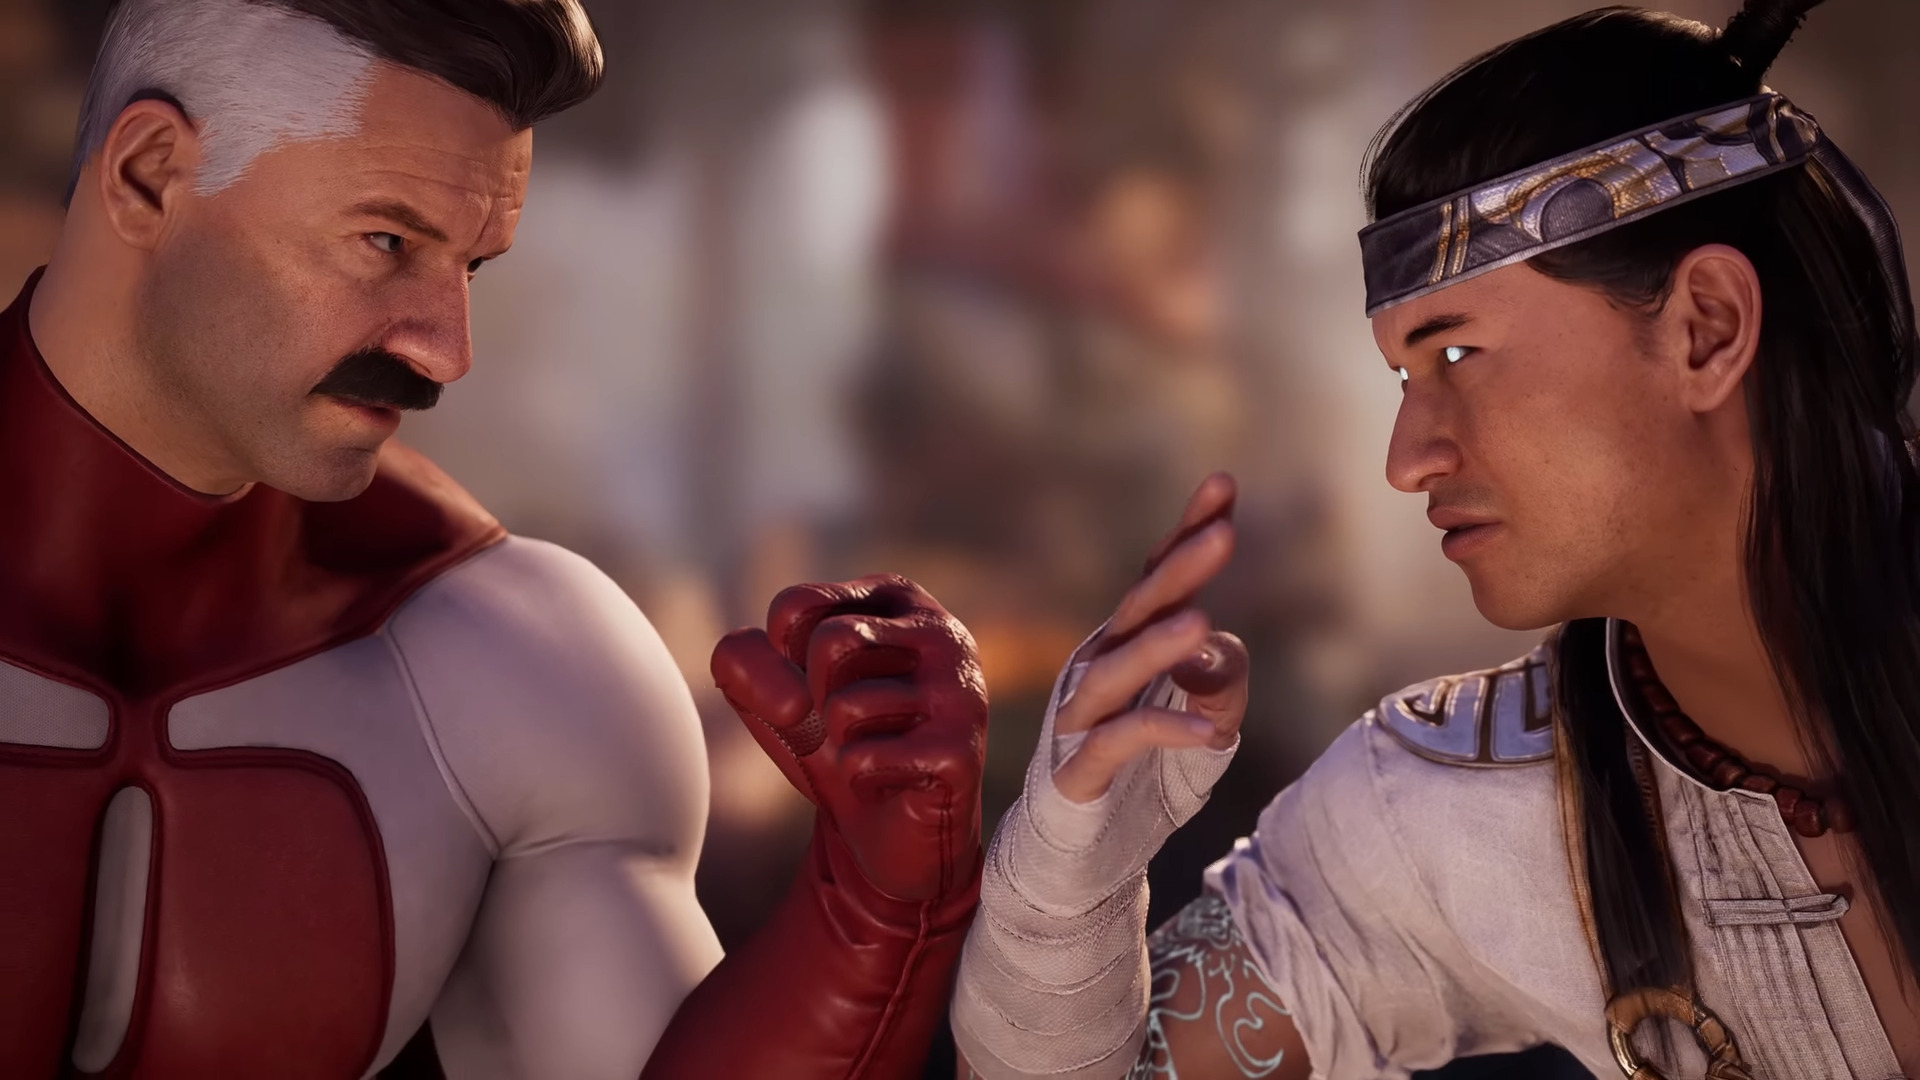 Yet another character has seemingly leaked for Mortal Kombat 1